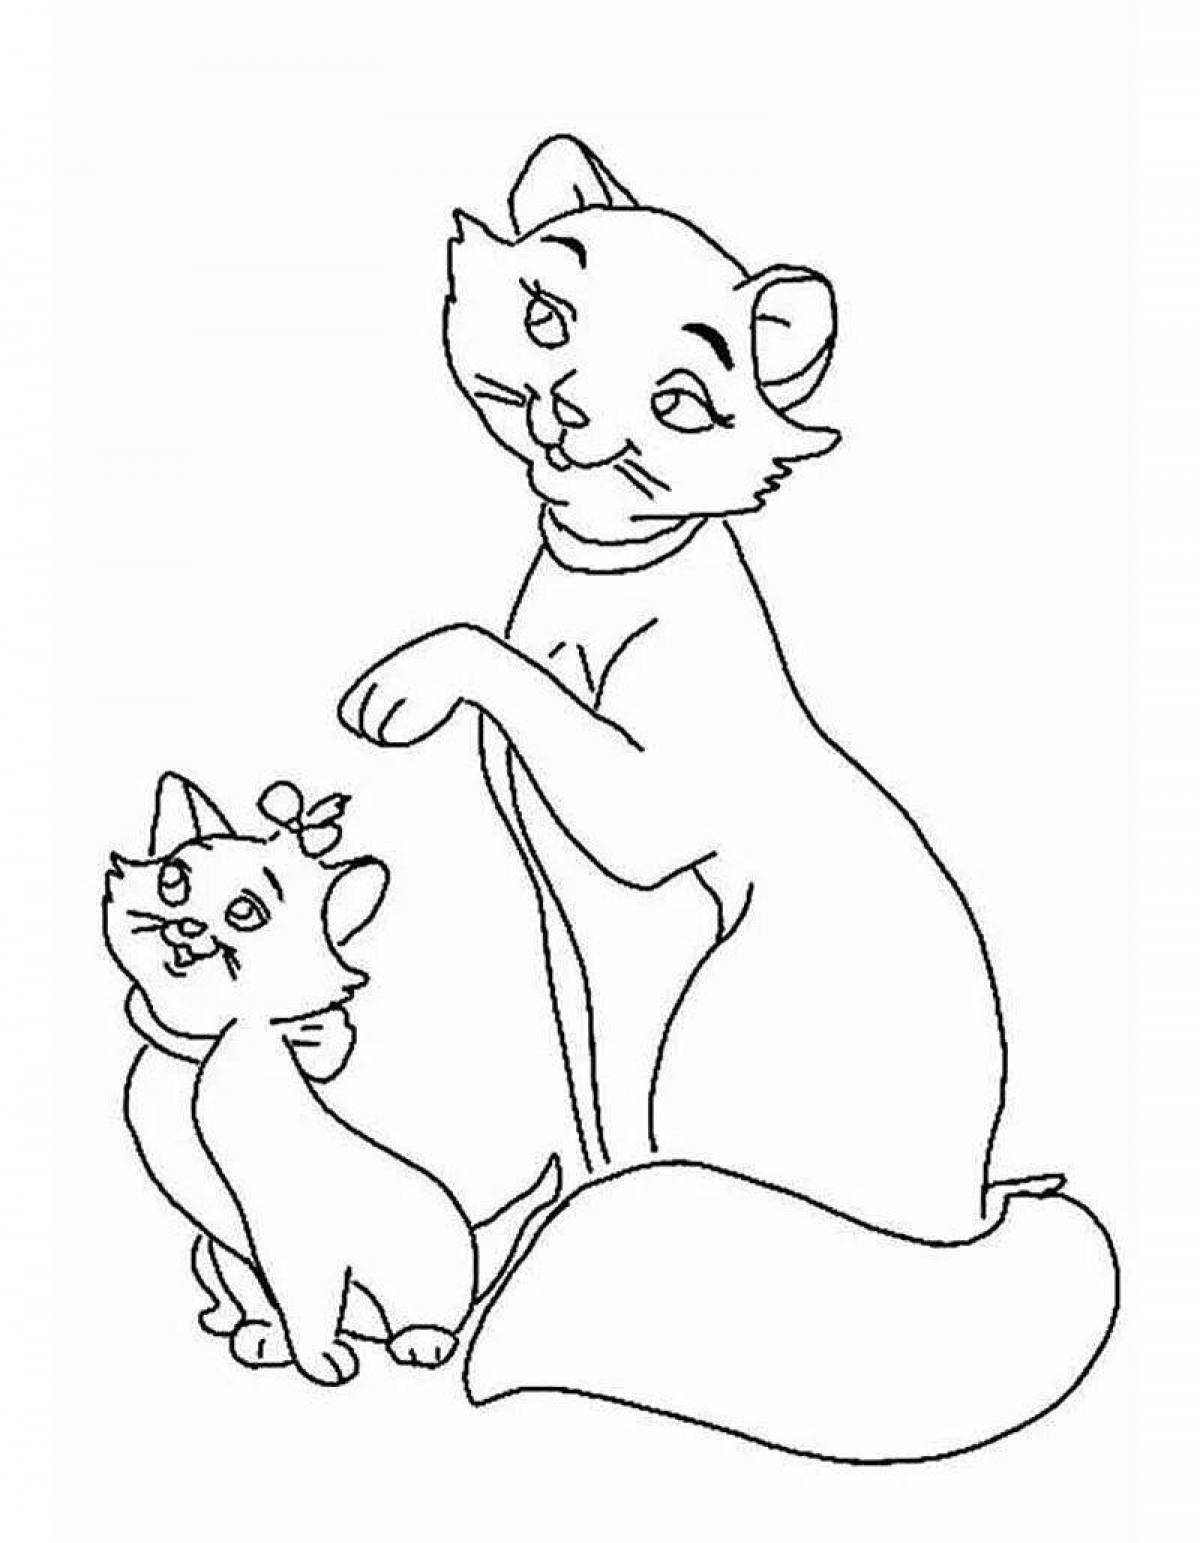 Coloring page wild mother cat